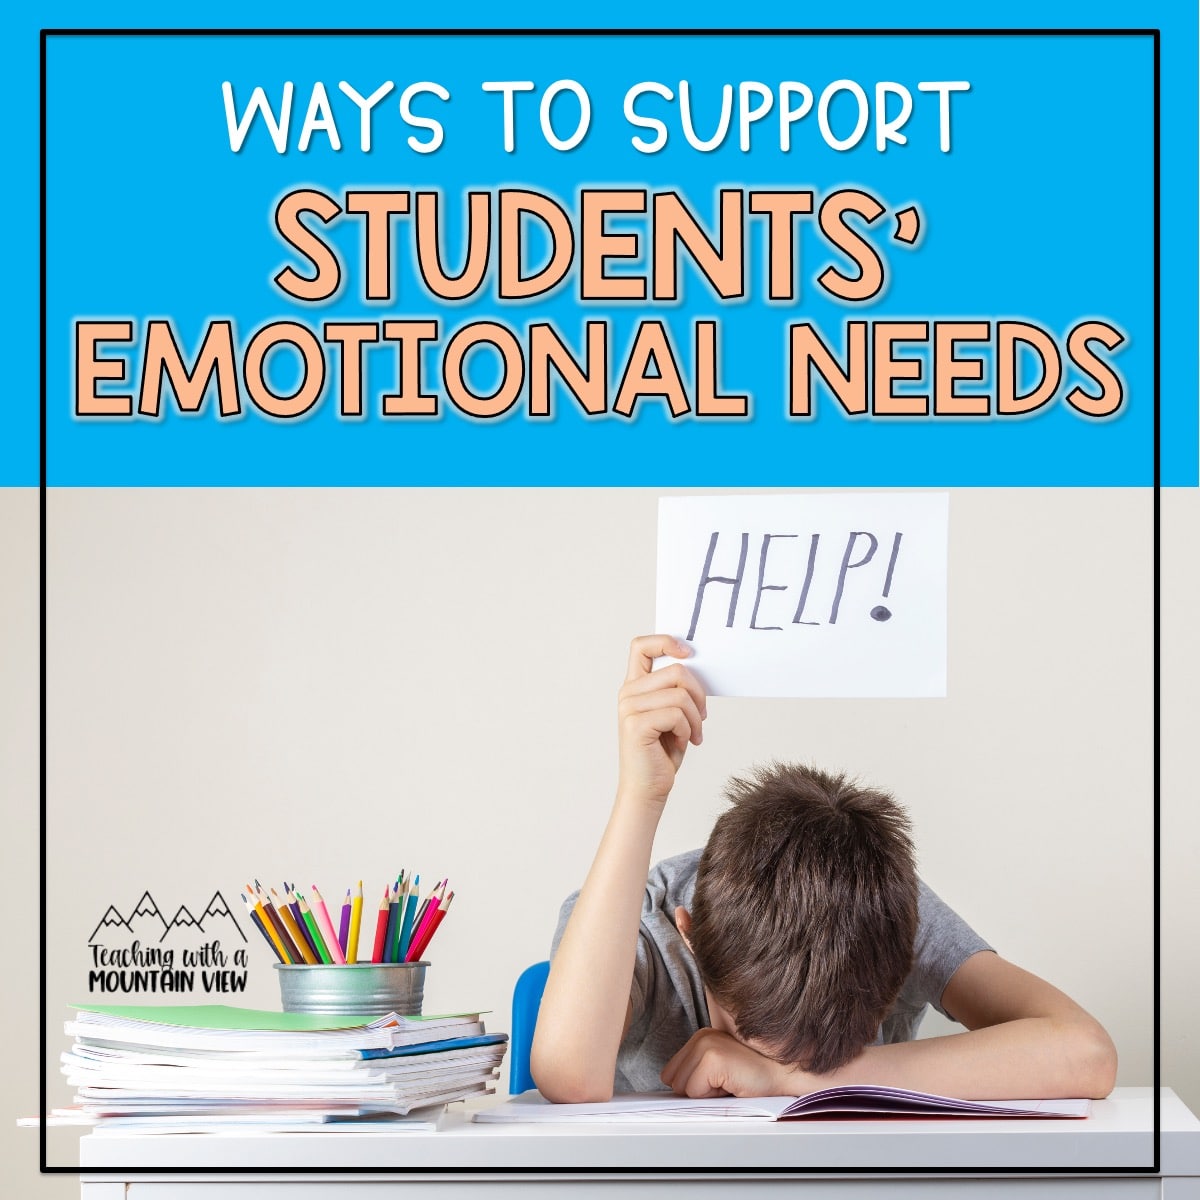 Practical coping strategies and resources that make meeting your students emotional needs a little less overwhelming.